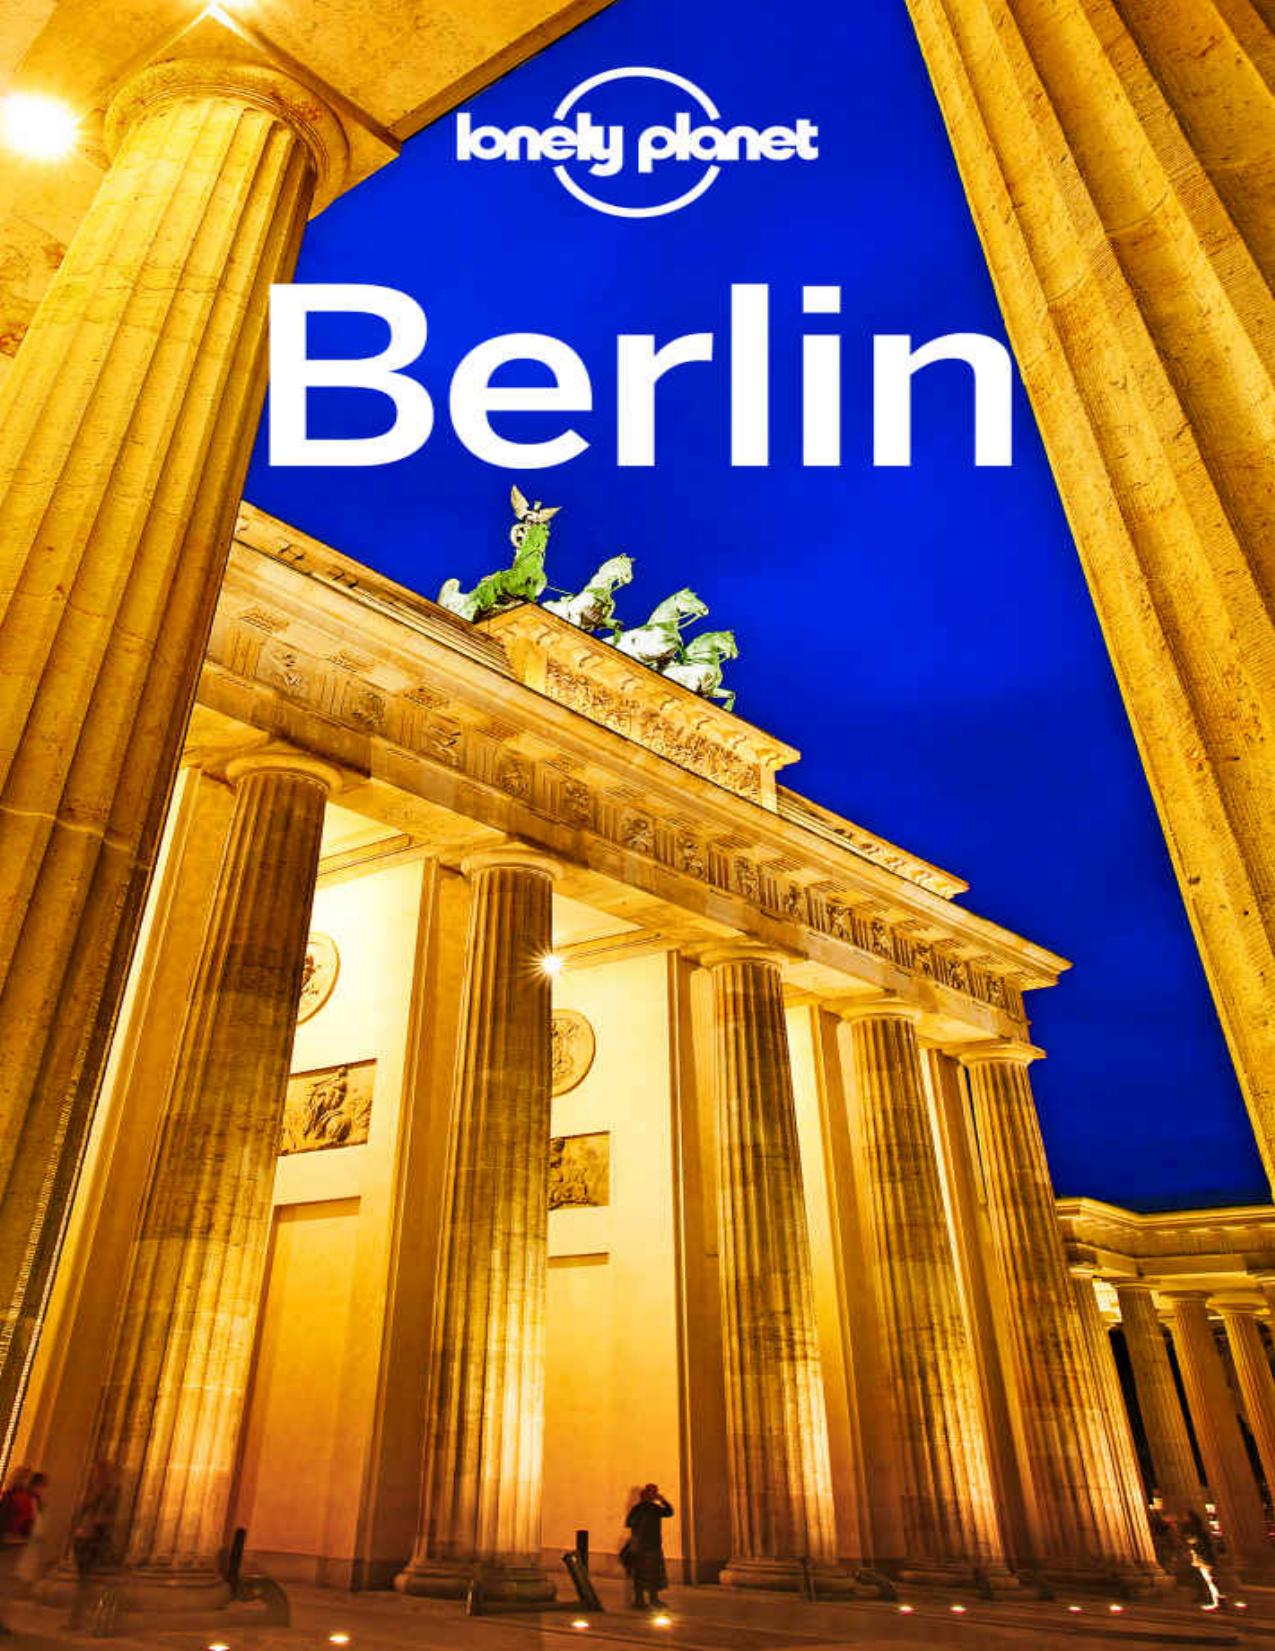 Lonely Planet Berlin (Travel Guide) by Lonely Planet & Andrea Schulte-Peevers